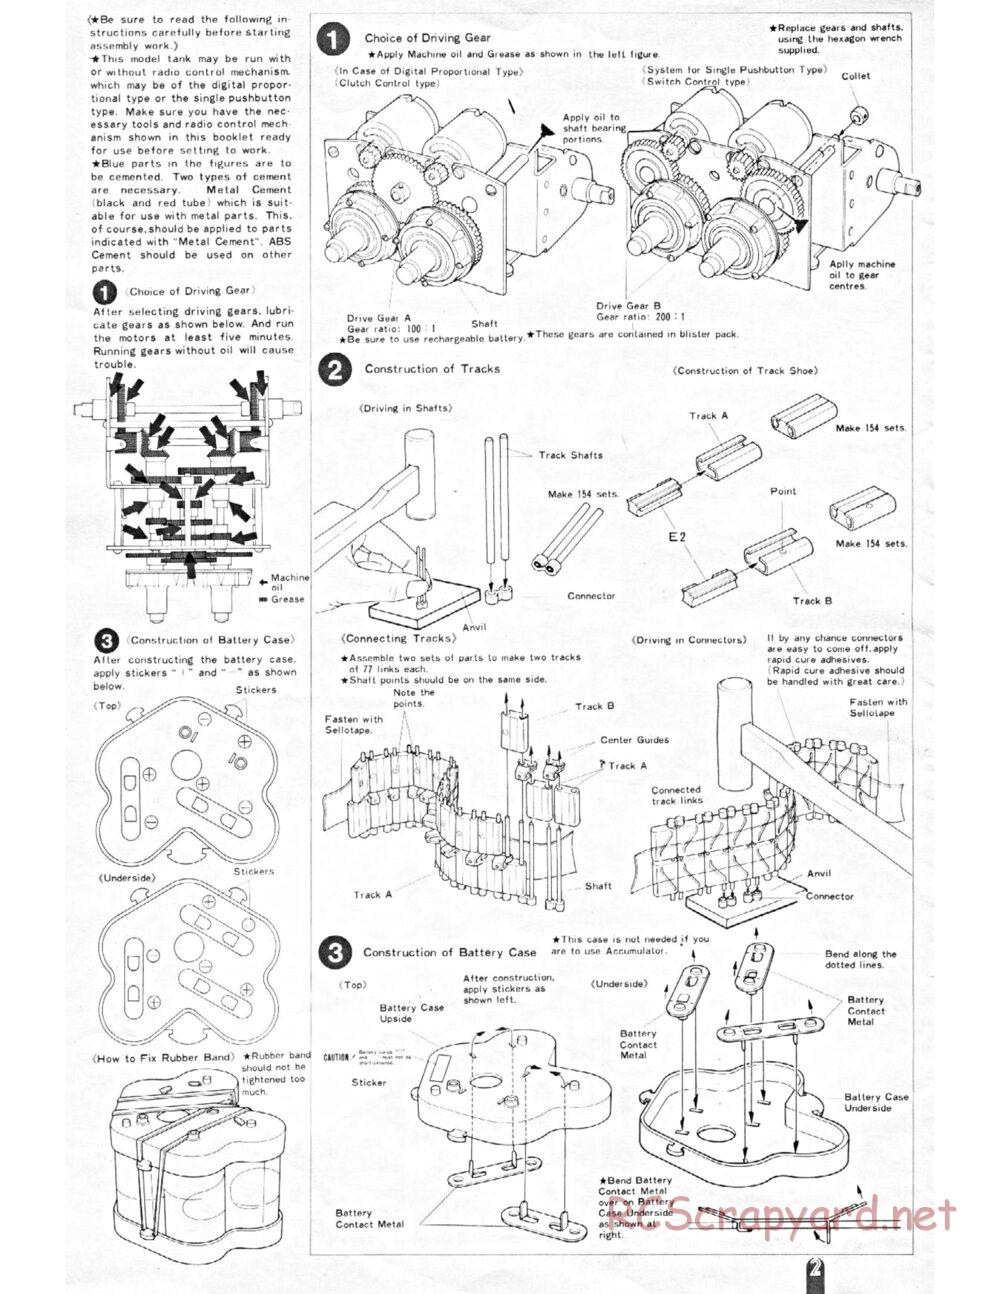 Tamiya - M4 Sherman 105mm Howitzer - 1/16 Scale Chassis - Manual - Page 2